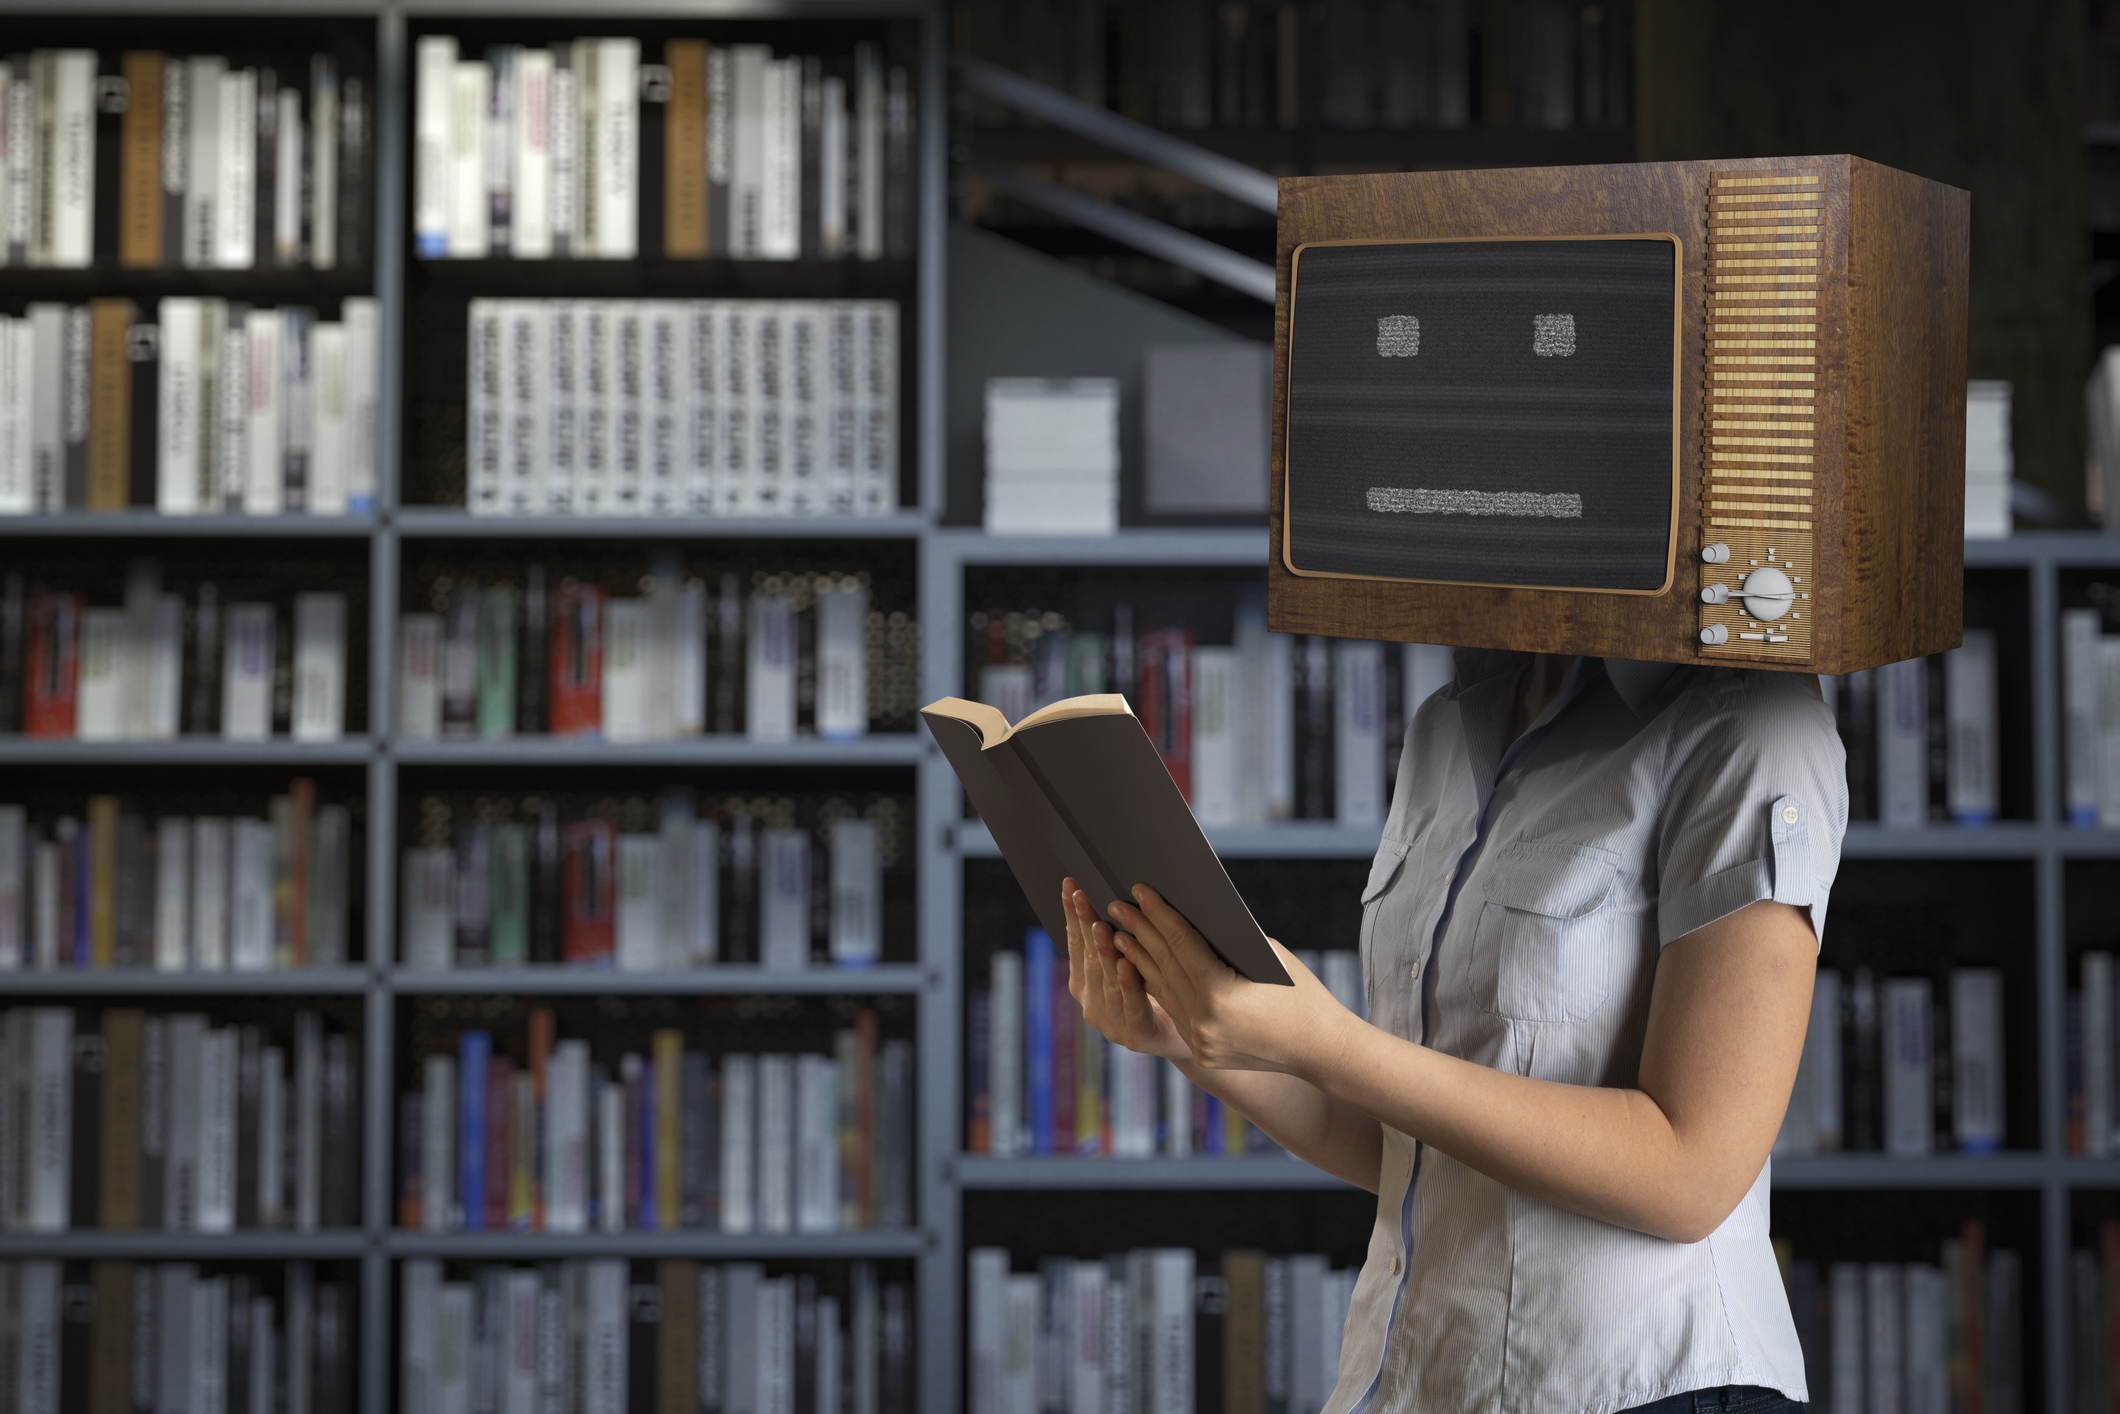 In a Library, A University Student with a TV on her head reads a book